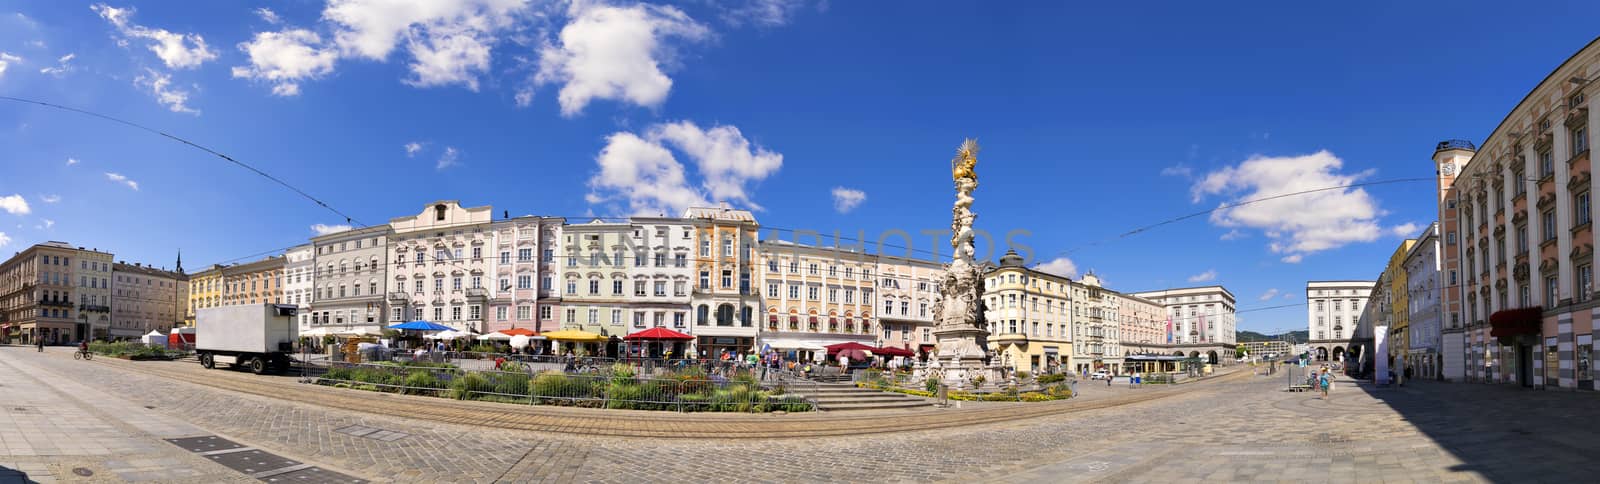 Panorama main square Linz by w20er